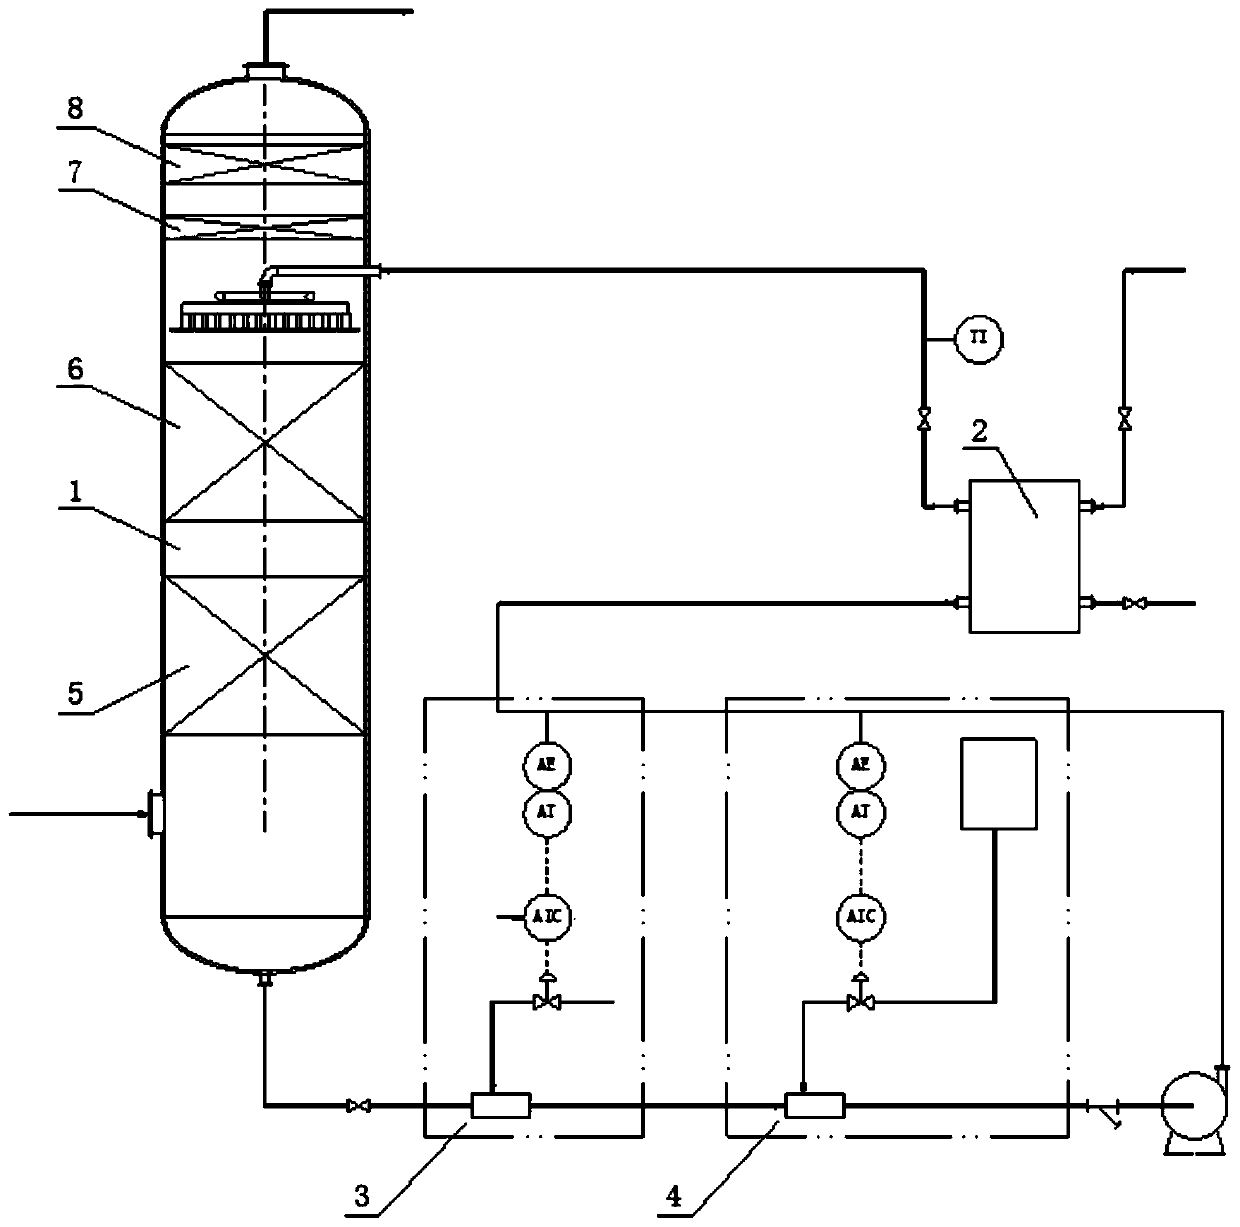 Circulating pretreatment system for carbon dioxide capture of coal-fired power plant